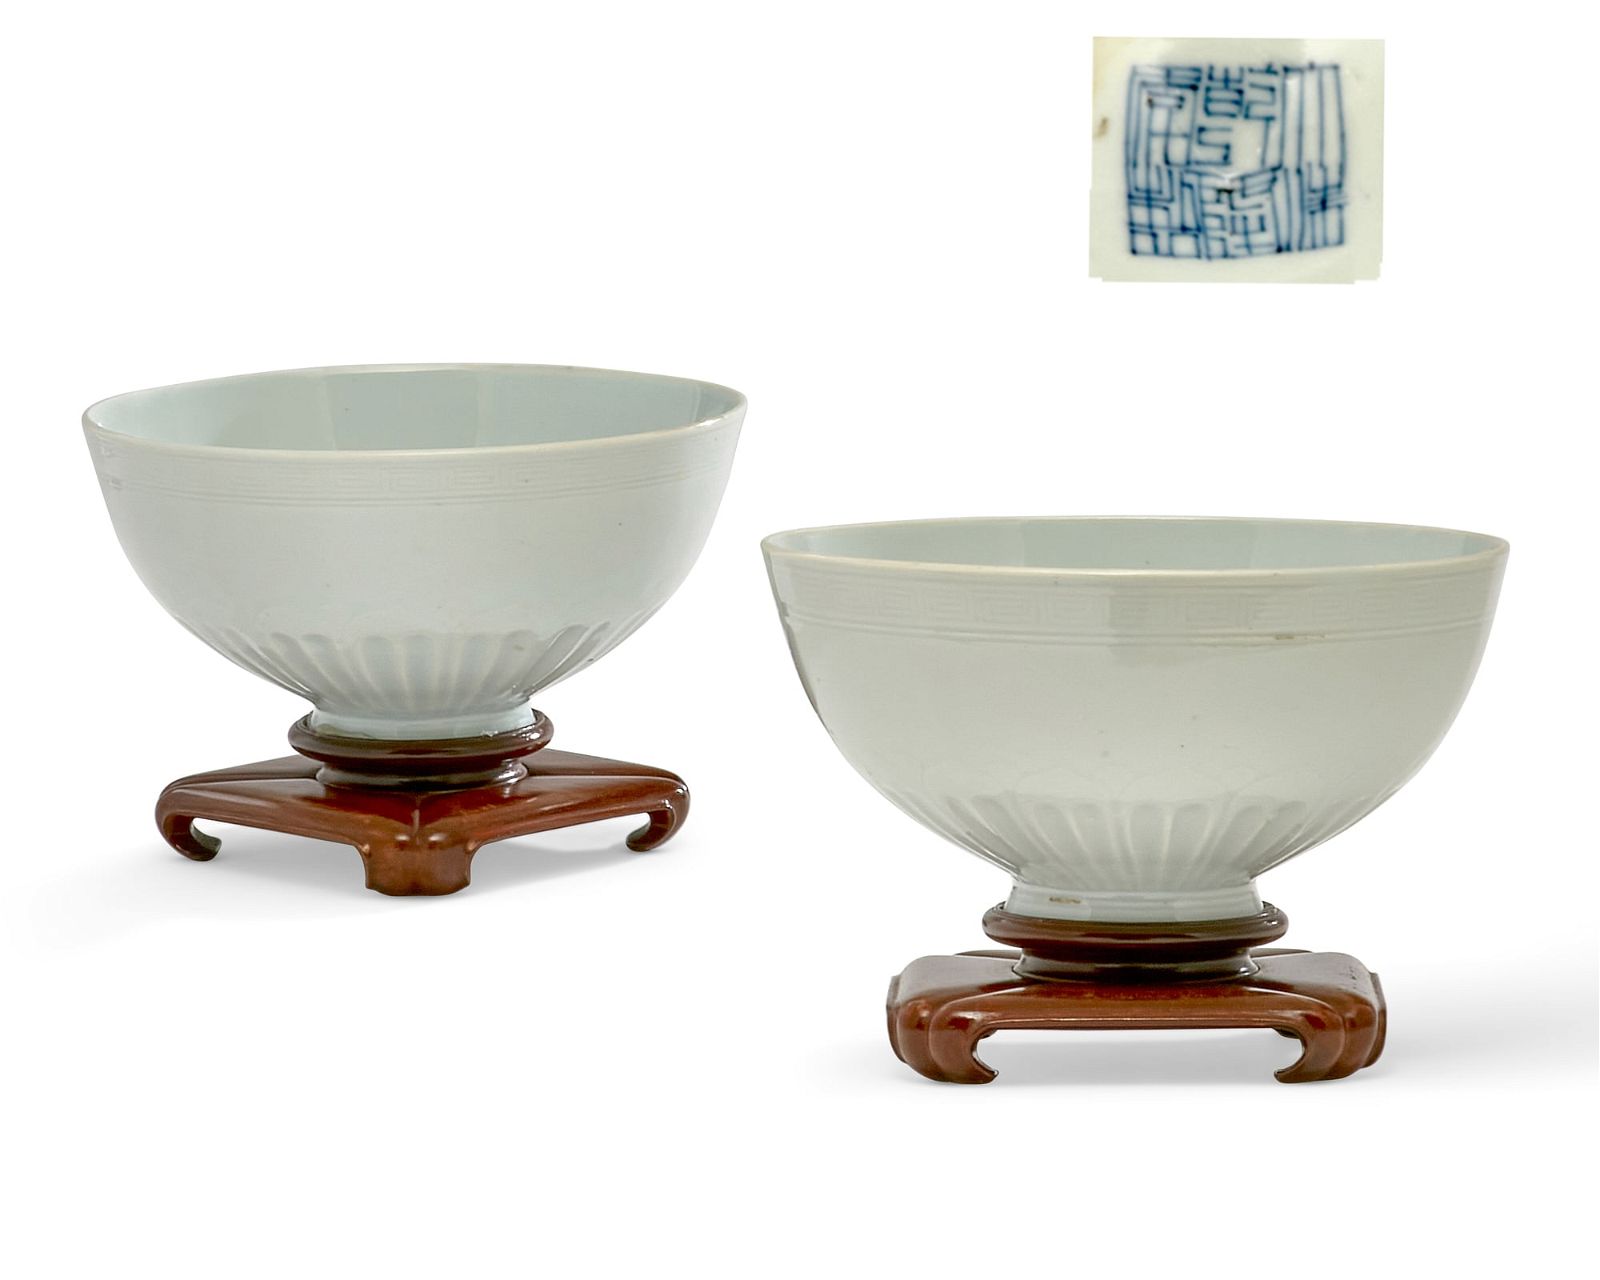 A PAIR OF CHINESE BOWLS OF 'MANTOUXIN'